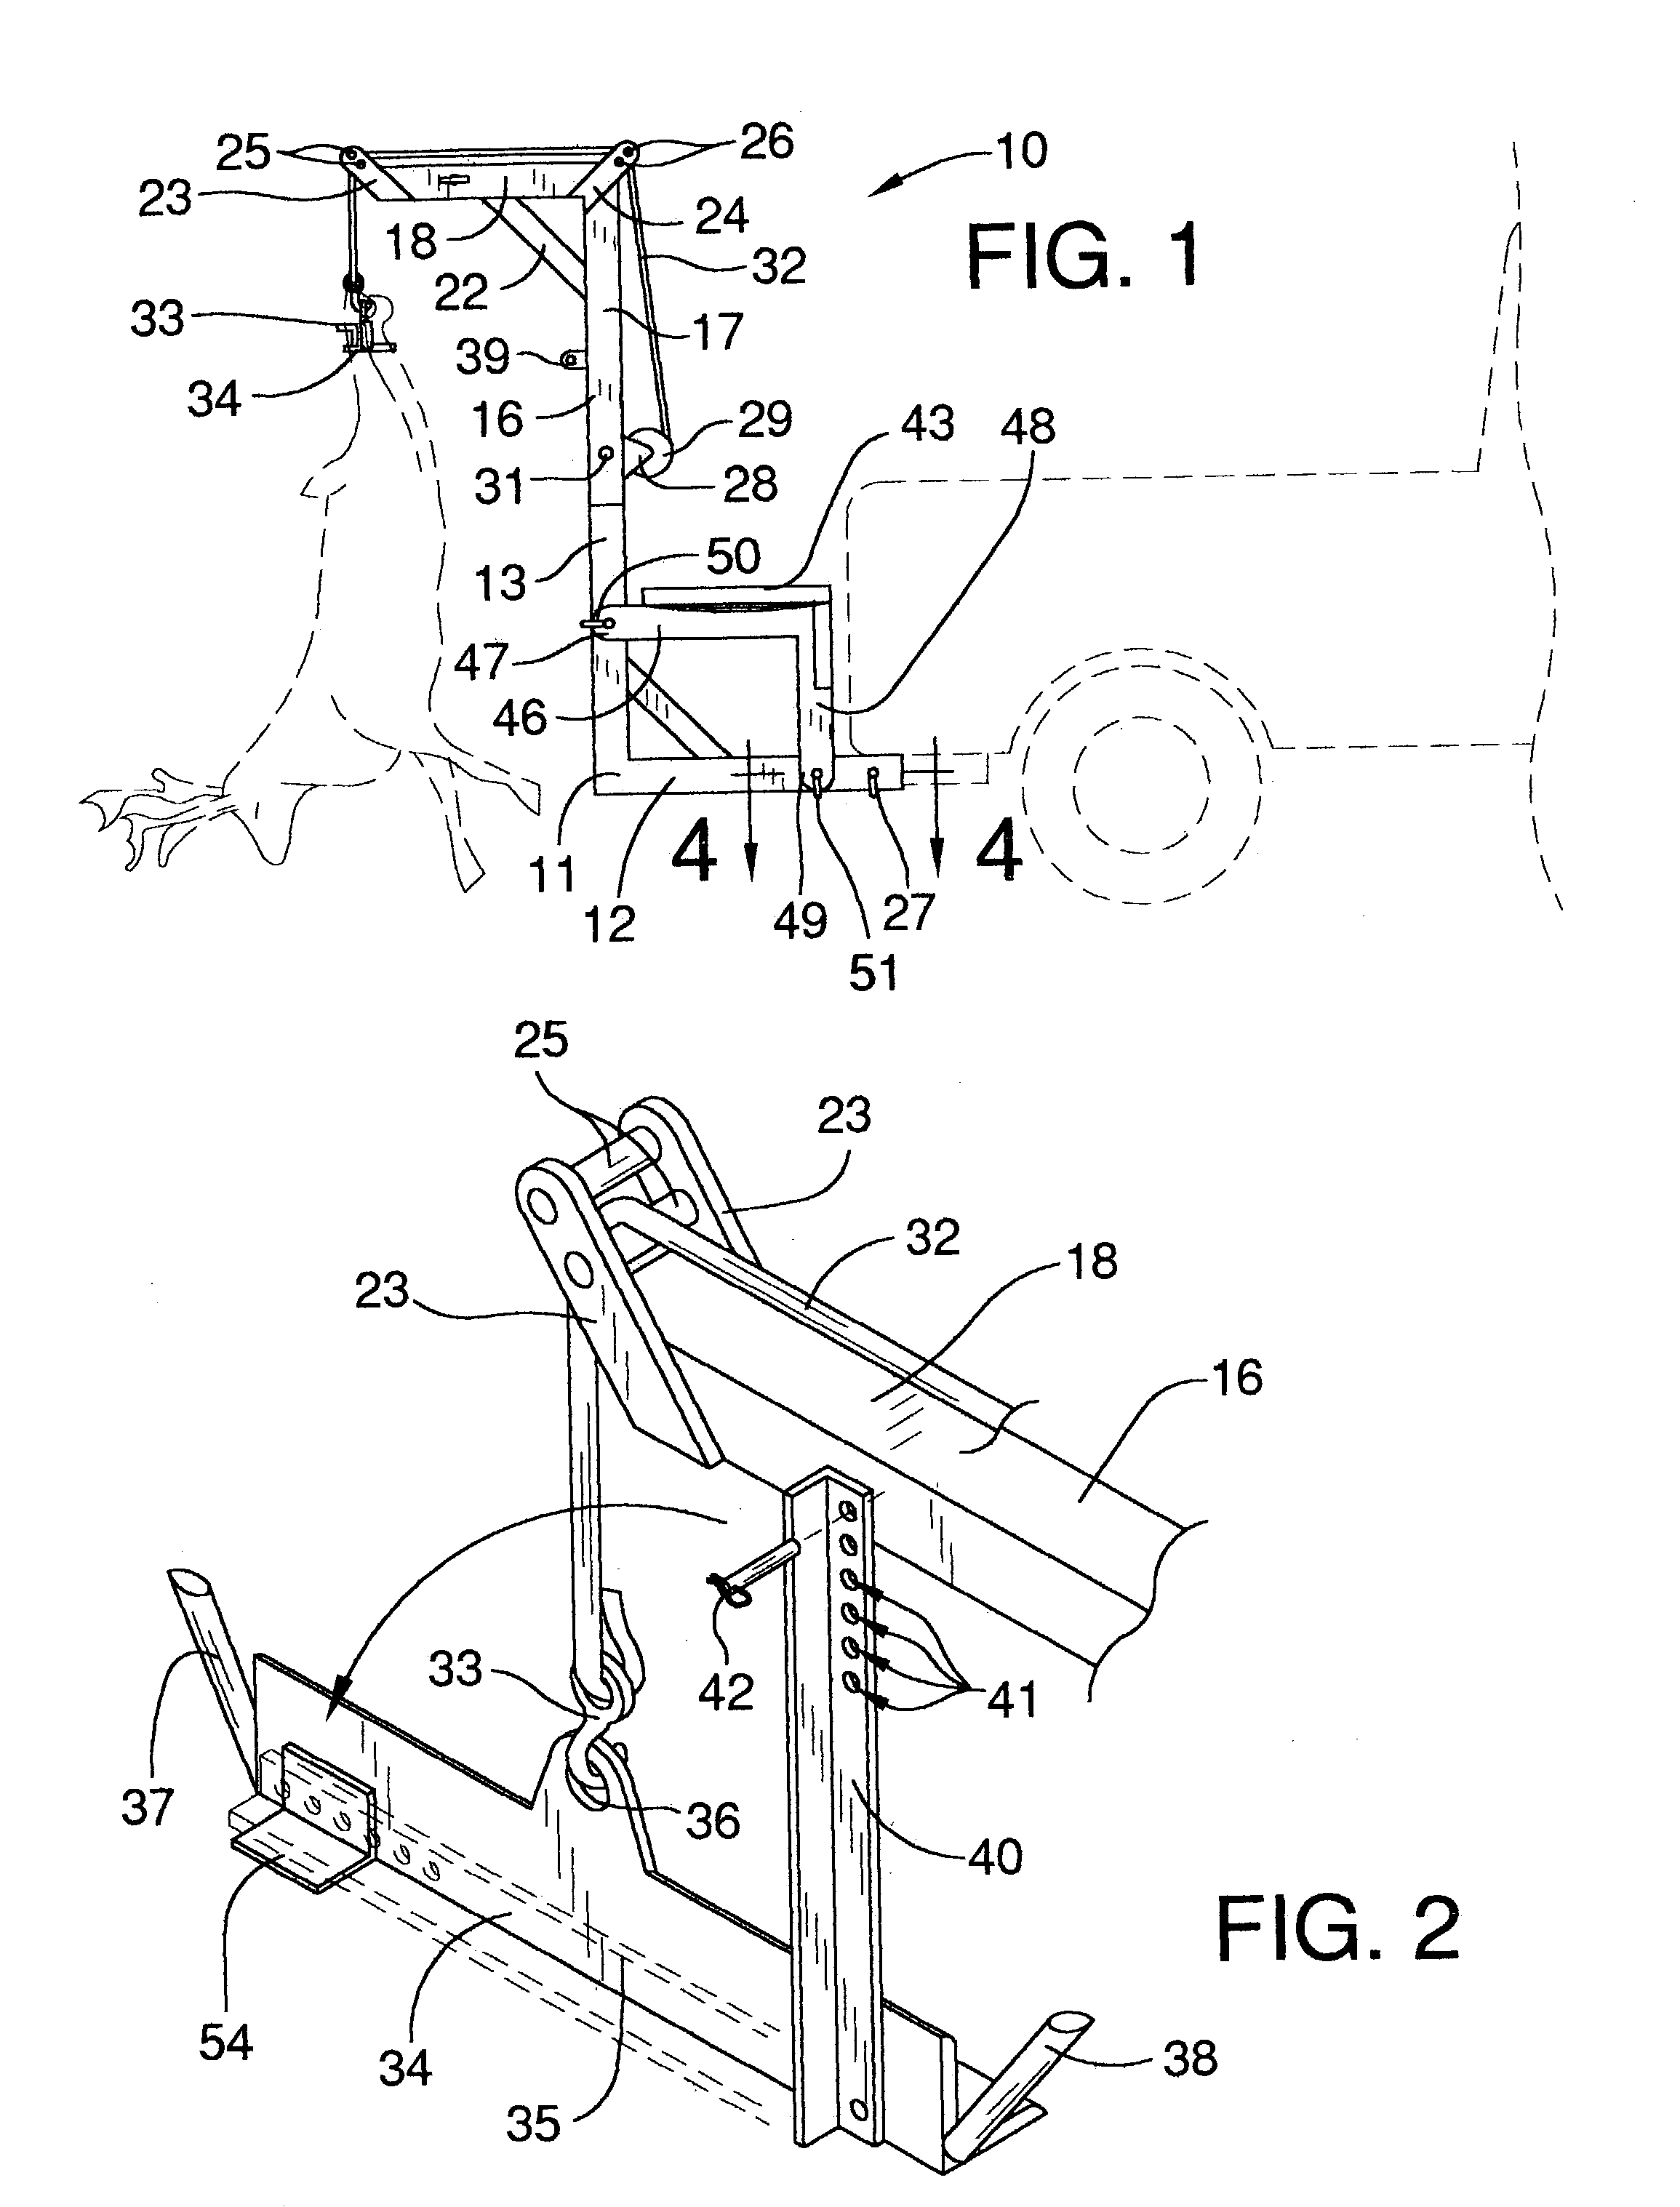 Hitch-mounted game carrier apparatus